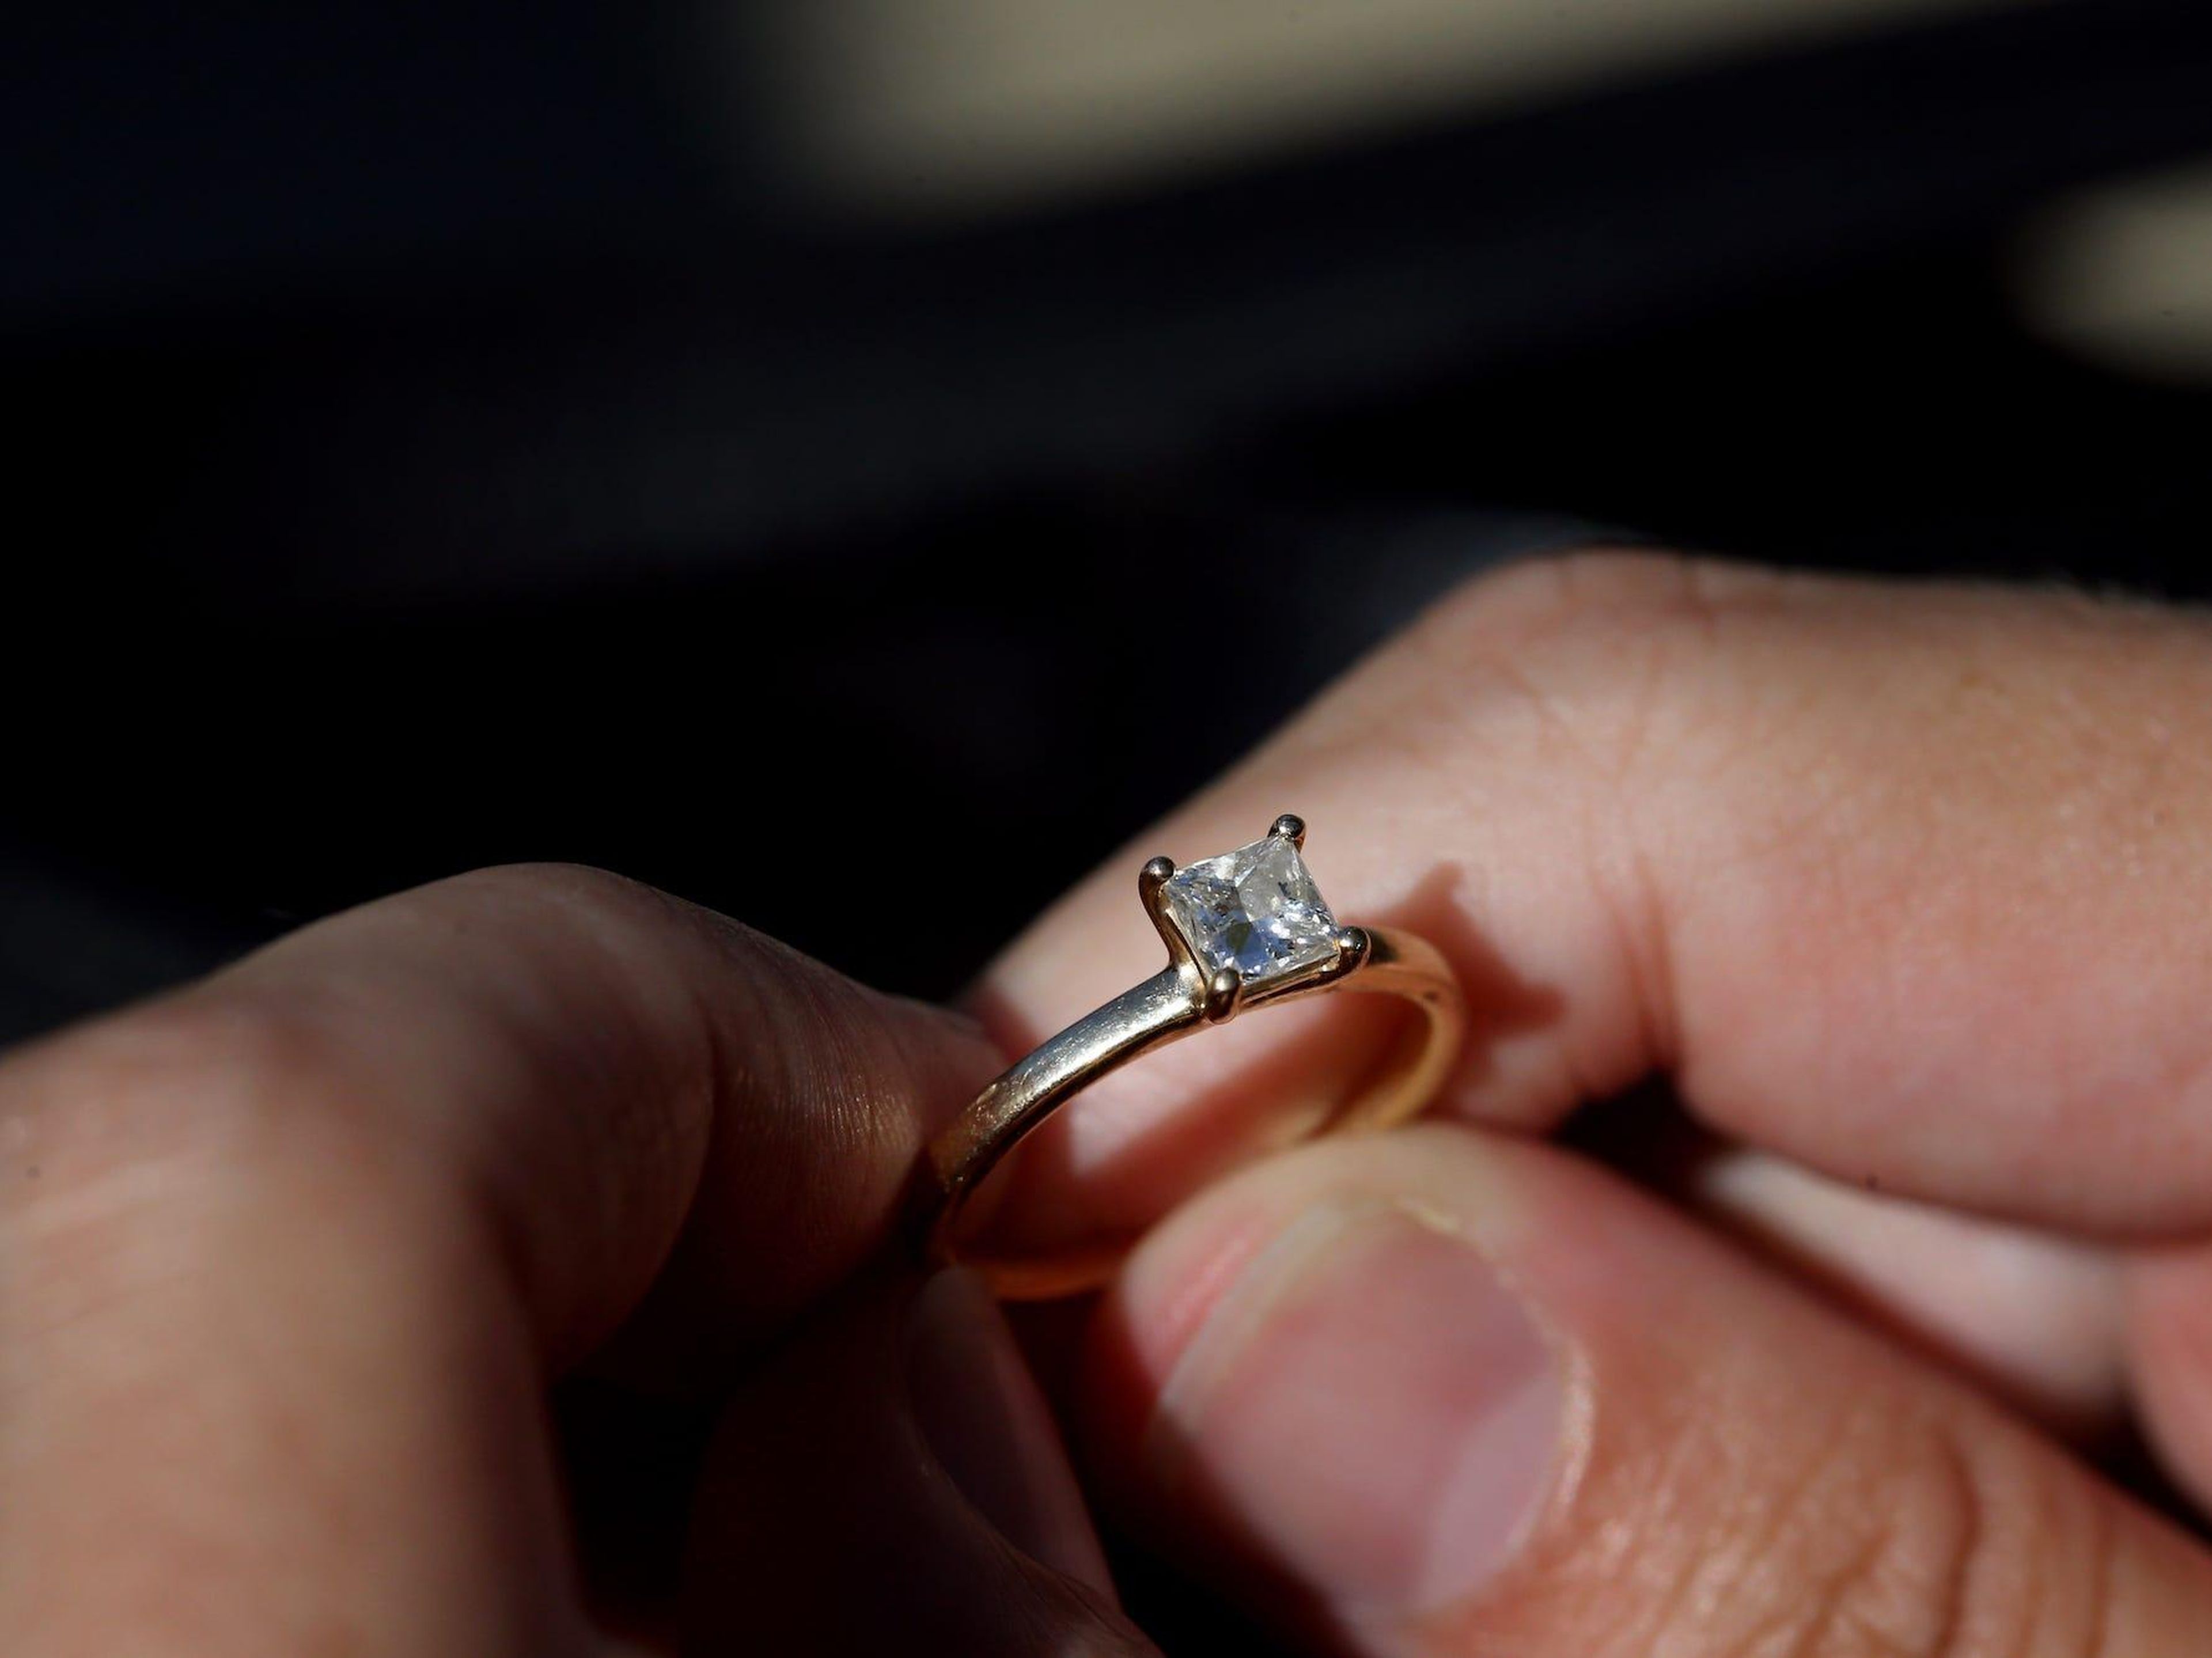 The resale market for diamond engagement rings is booming, as the pandemic causes divorce rates to spike and has become a 'make-or-break' moment for couples